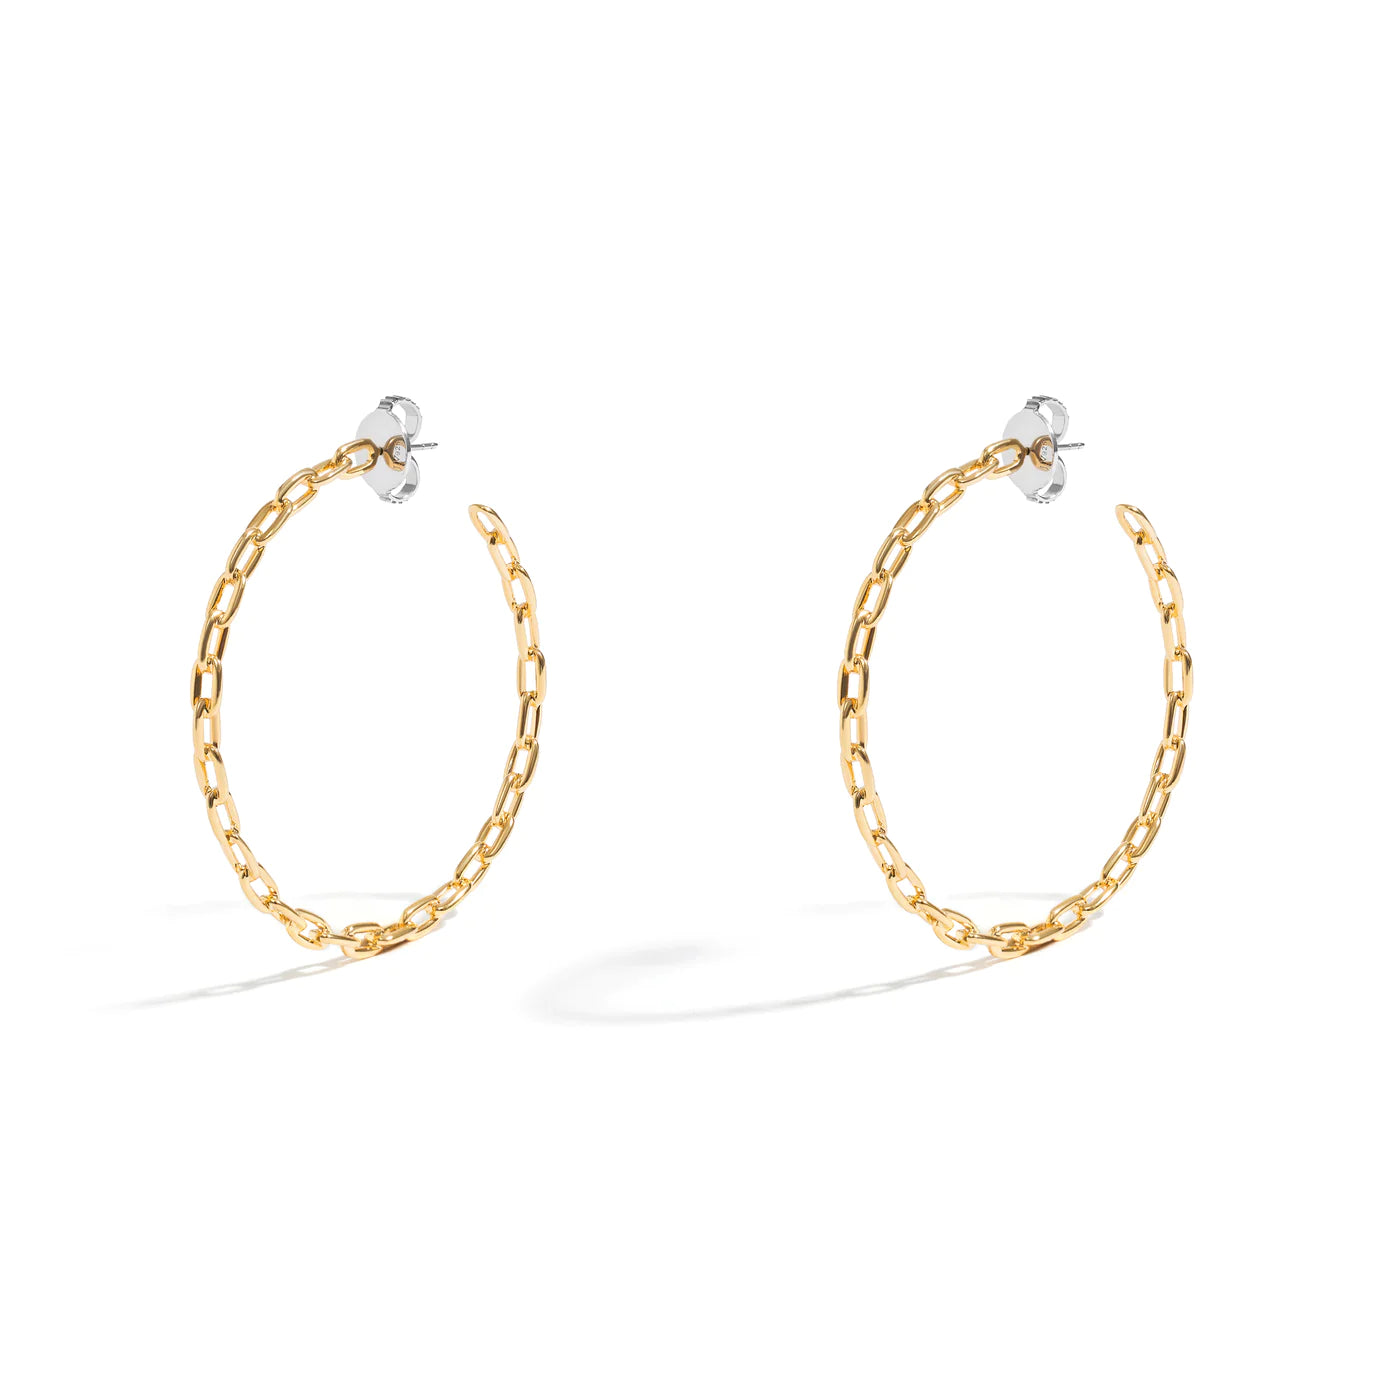 LARGE CHAIN HOOP EARRING IN 18K YELLOW GOLD PLATED SILVER